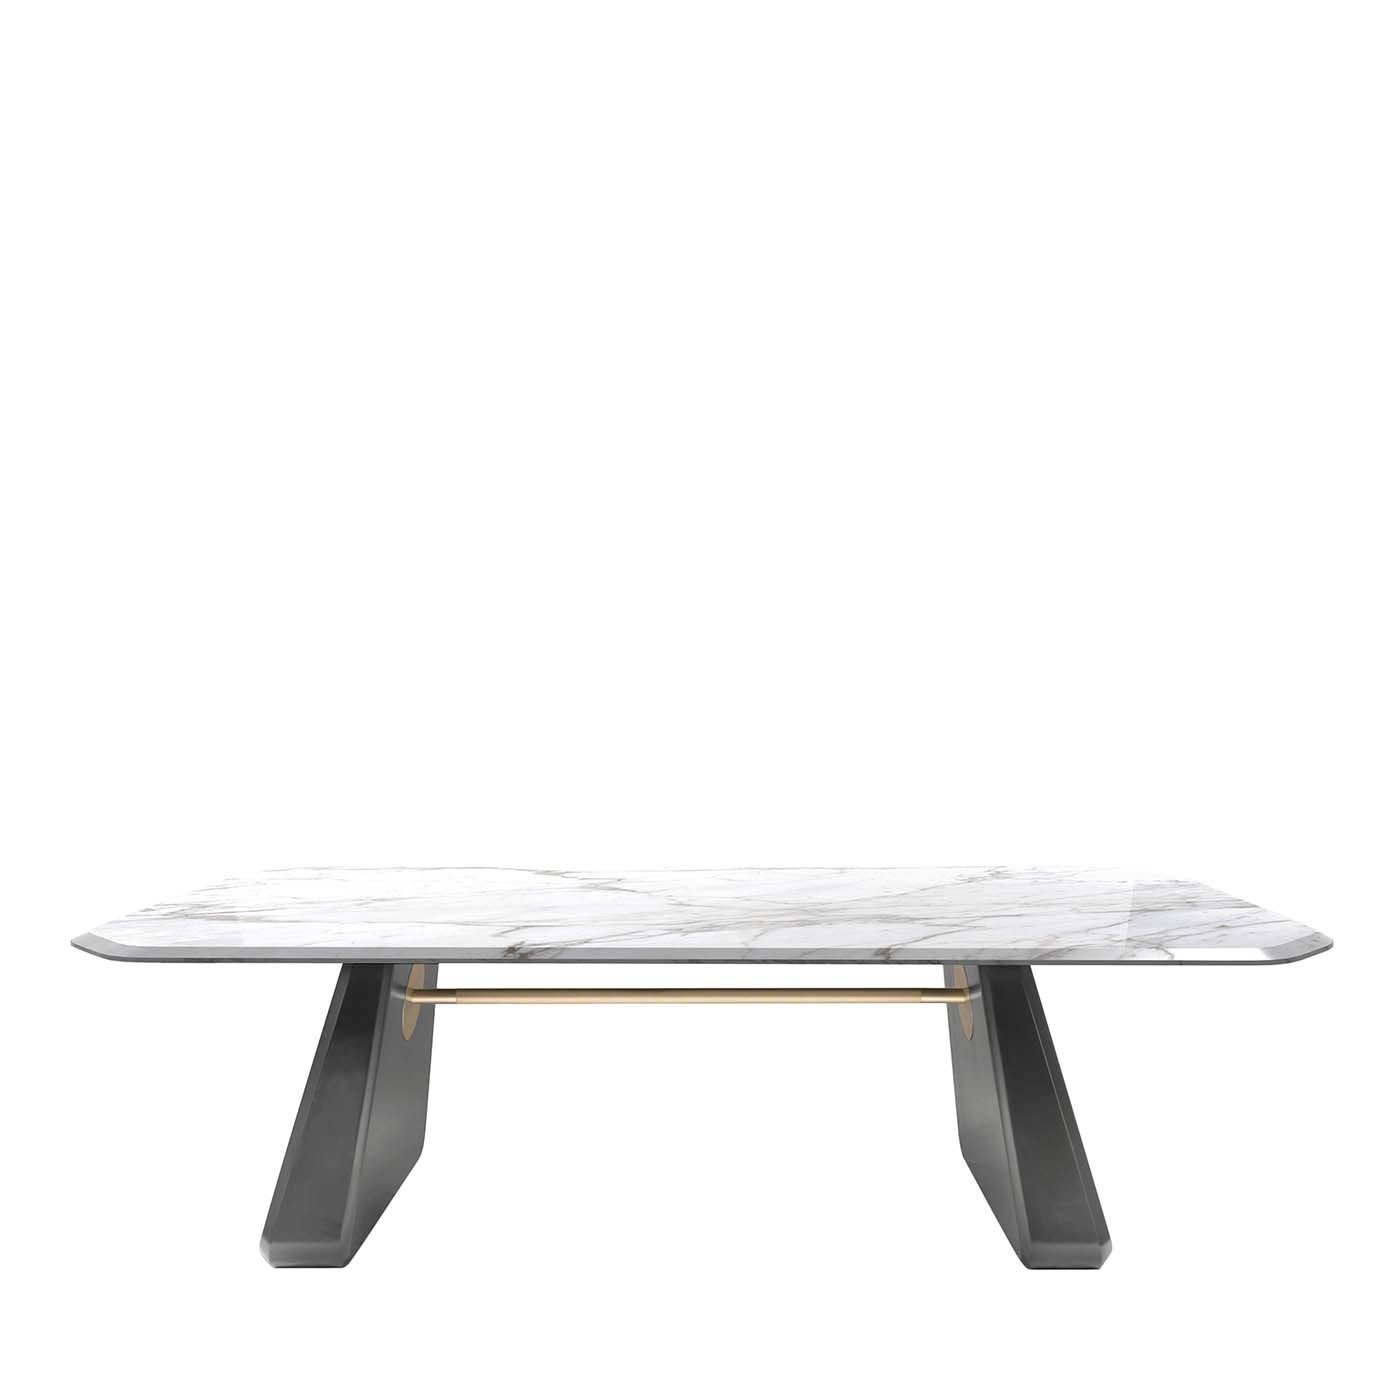 Henge Dining Table with Calacatta Marble Top - Secolo